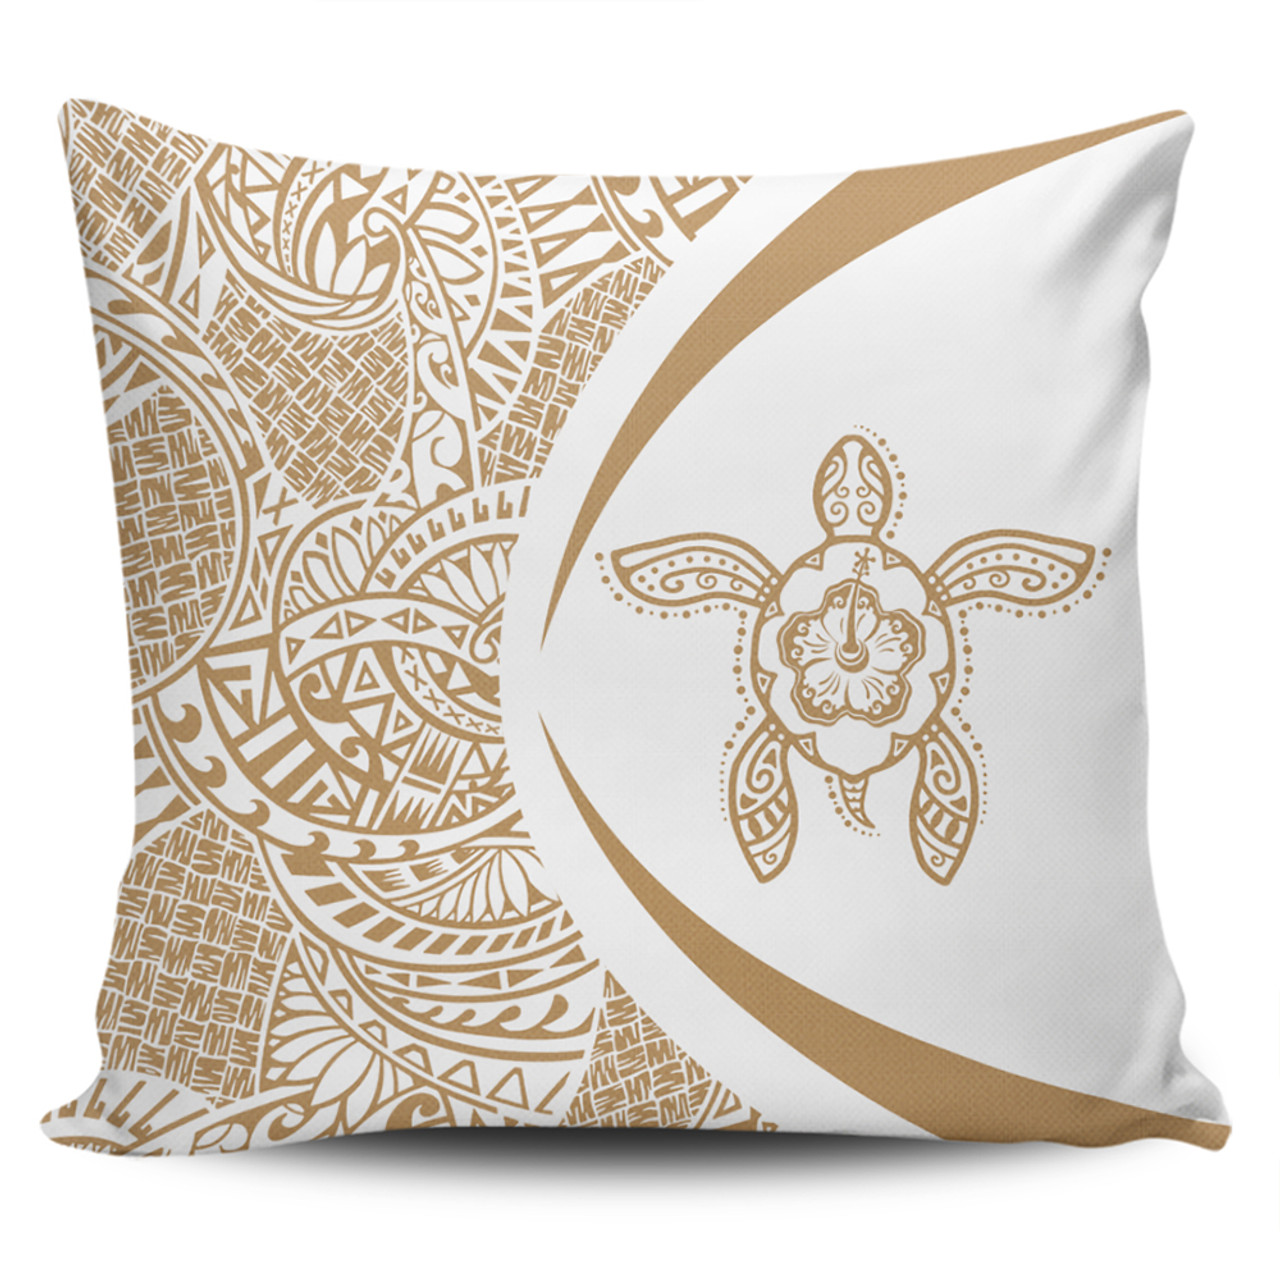 Hawaii Pillow Cover Turtle Hibiscus Lauhala White Gold Circle